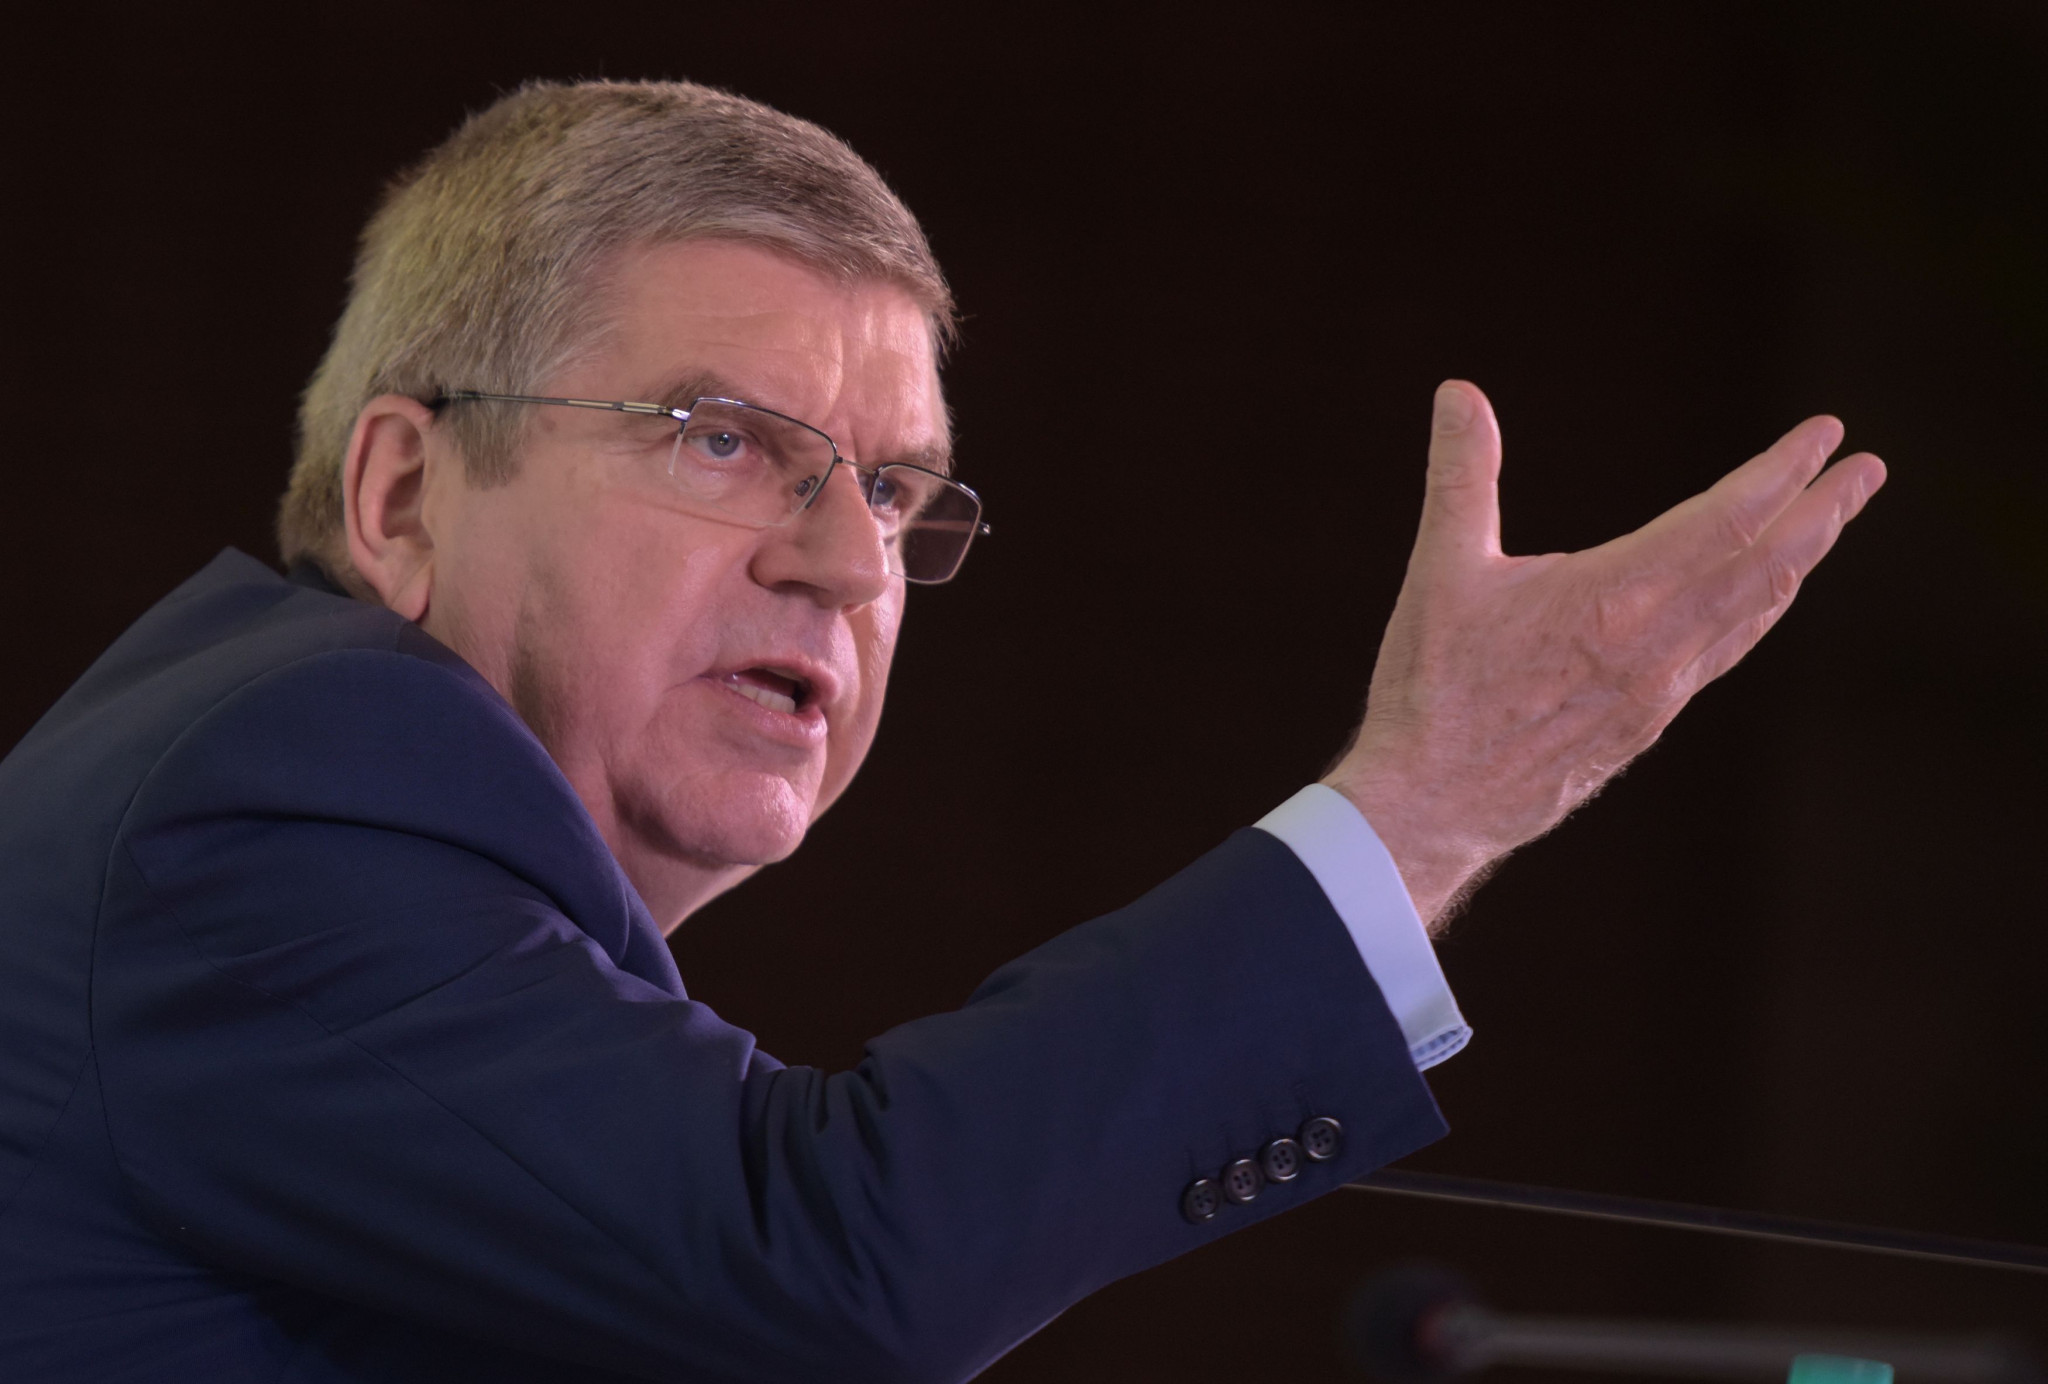 Thomas Bach batted-off questions from Russian journalists during the Executive Board meeting ©Getty Images